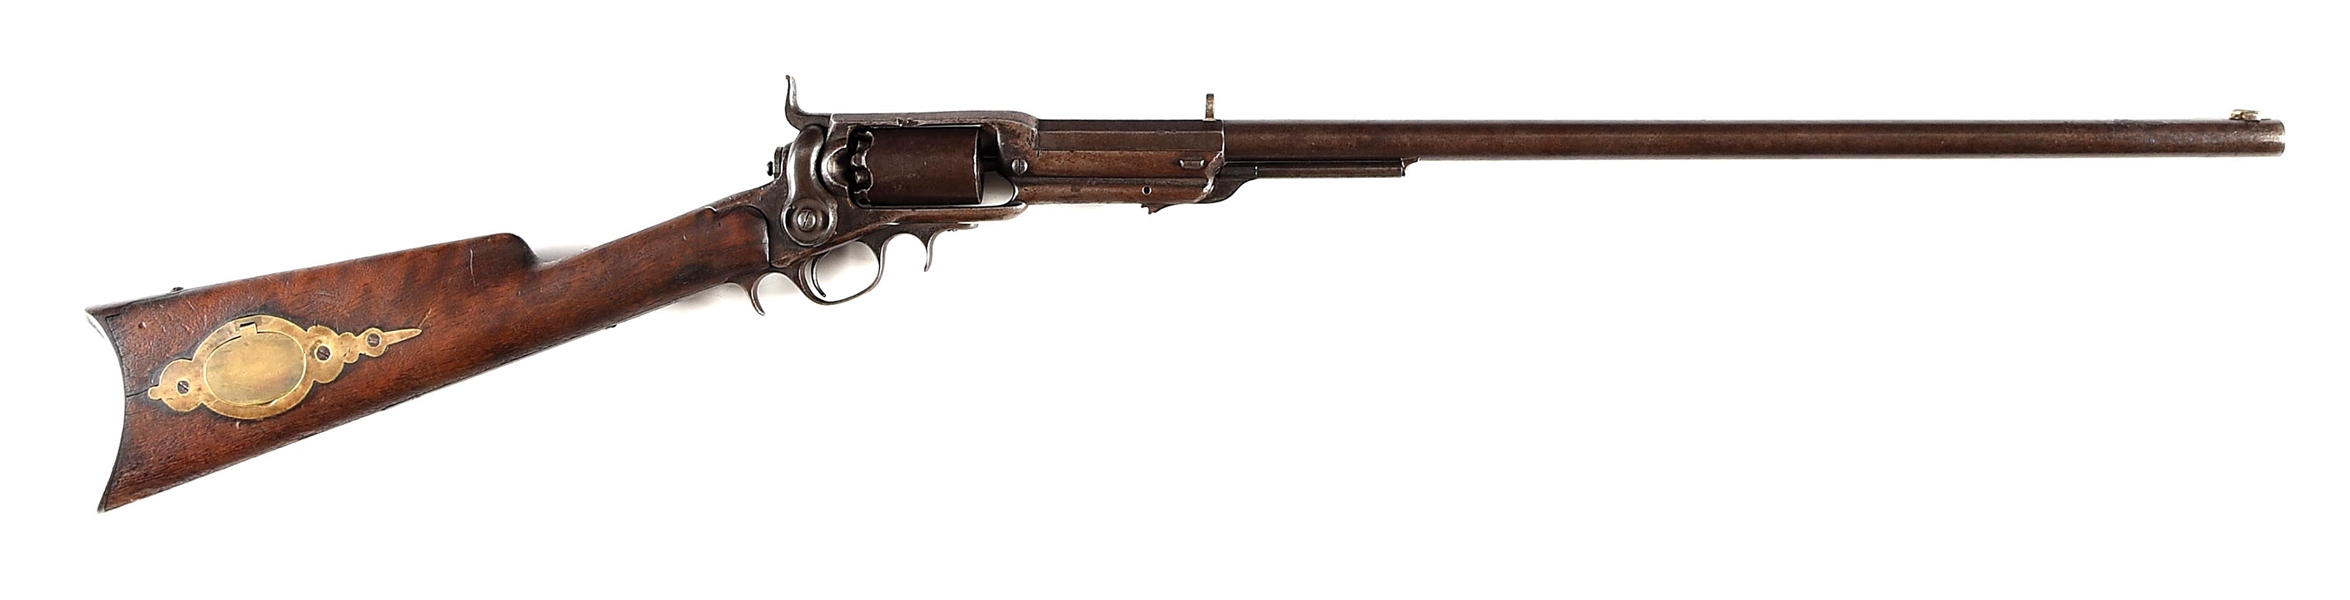 (A) FIRST MODEL COLT MODEL 1855 ROOT SIDEHAMMER PERCUSSION REVOLVING RIFLE.